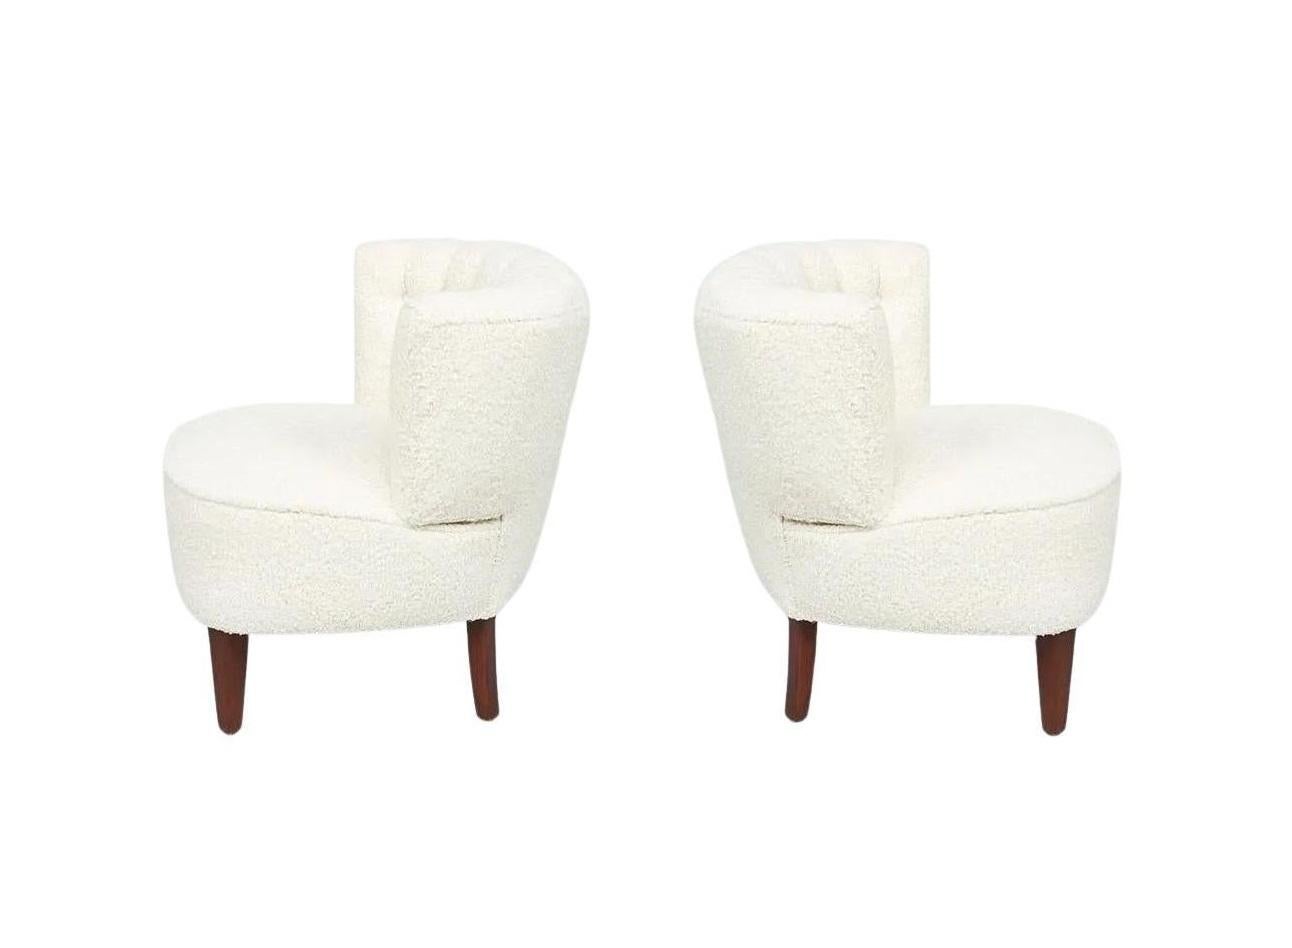 Mid-Century Otto Schultz Lounge Chairs in Bouclé, Sweden, ca 1950s For Sale 7